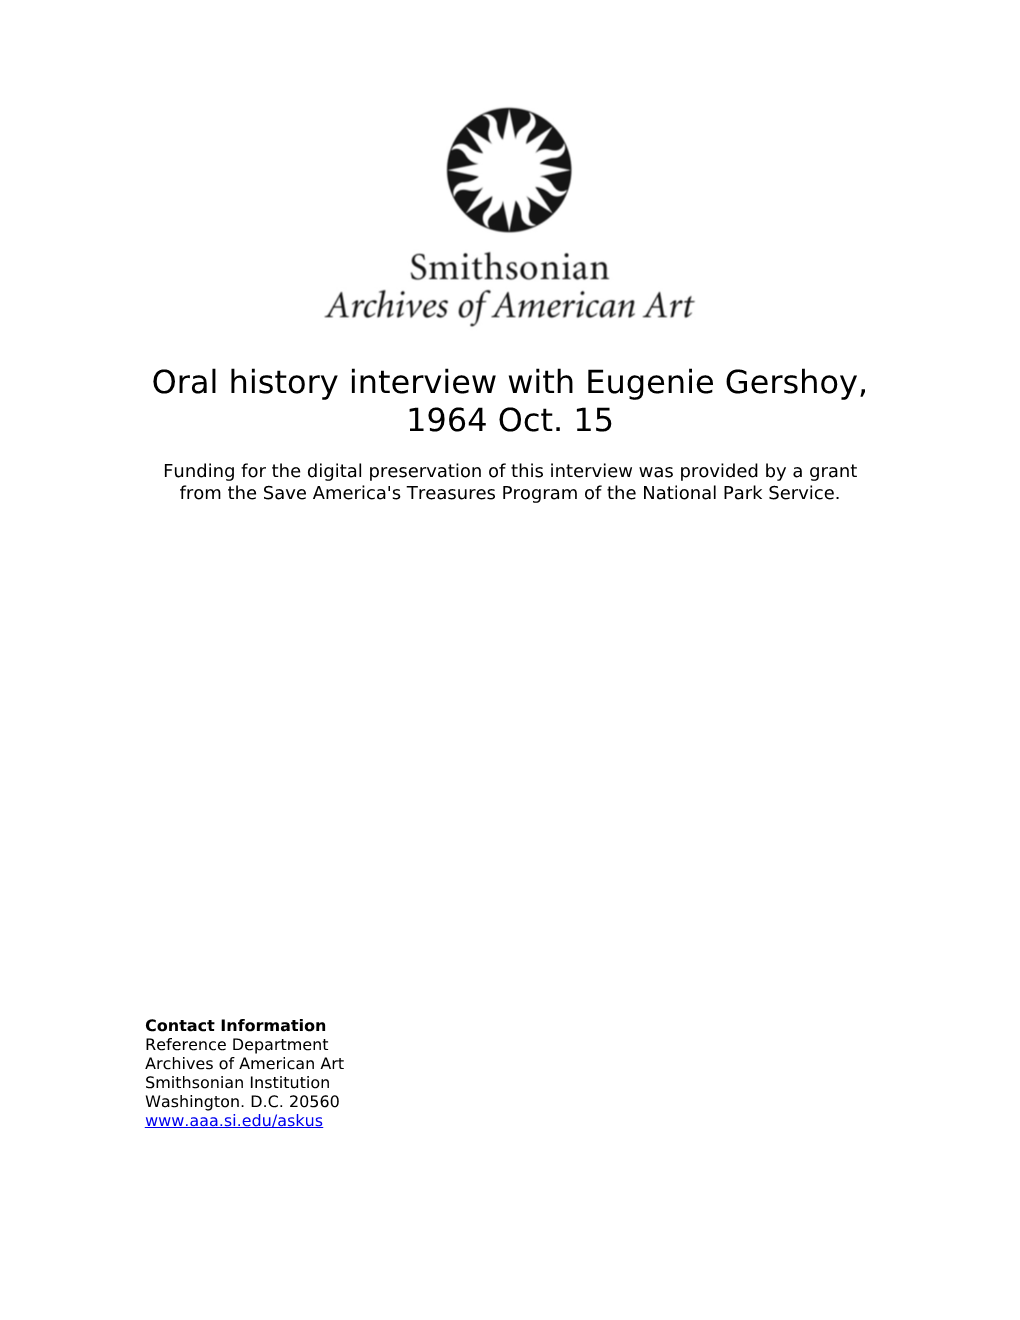 Oral History Interview with Eugenie Gershoy, 1964 Oct. 15